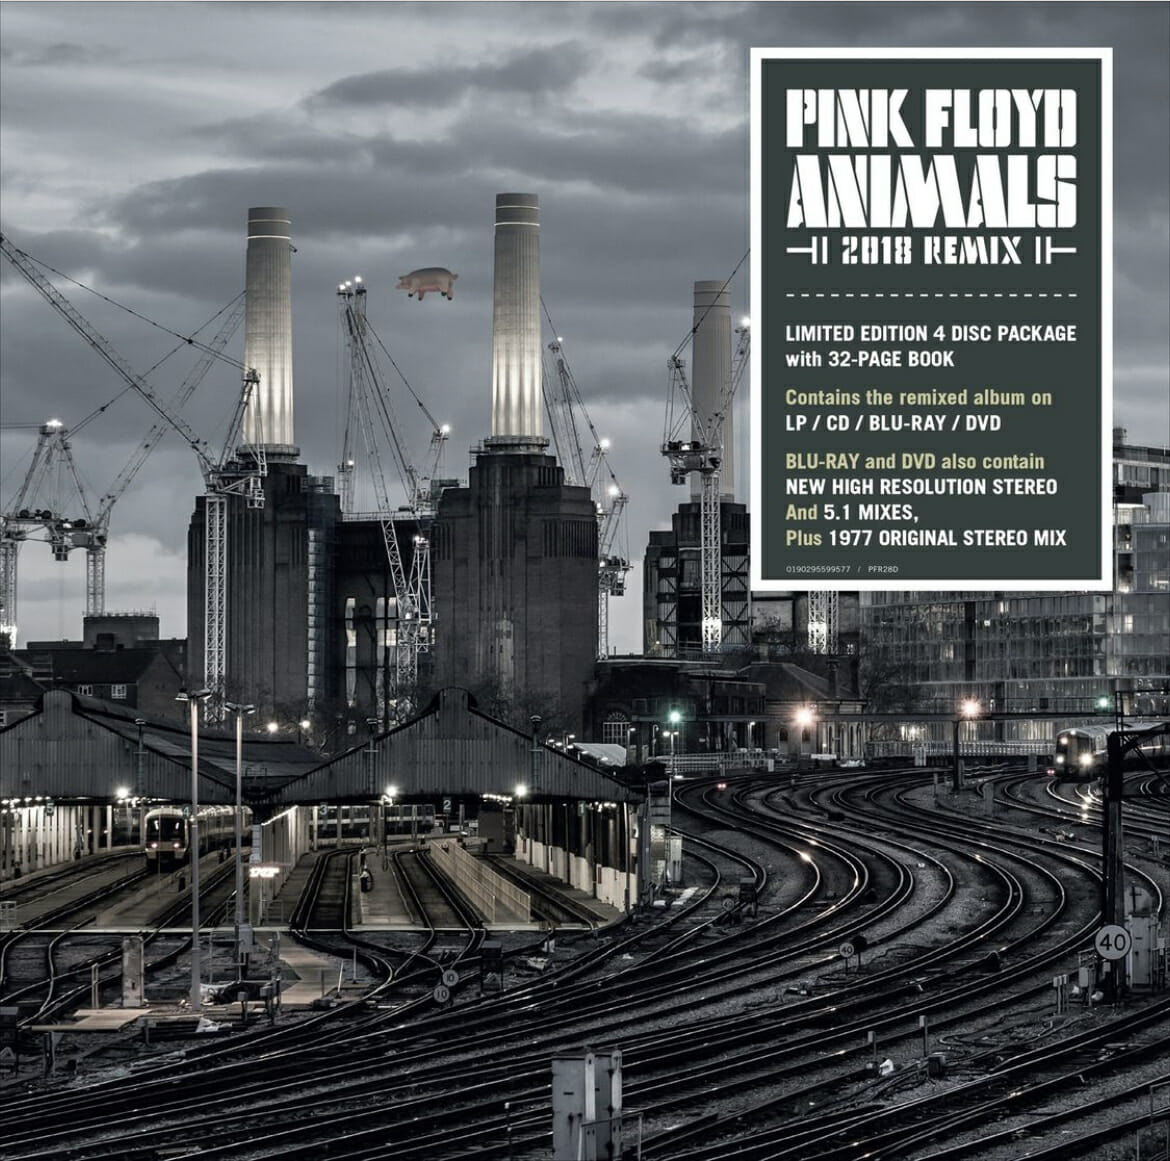 Pink Floyd Announce Release Date for Long-Awaited 2018 Remix of ‘Animals’